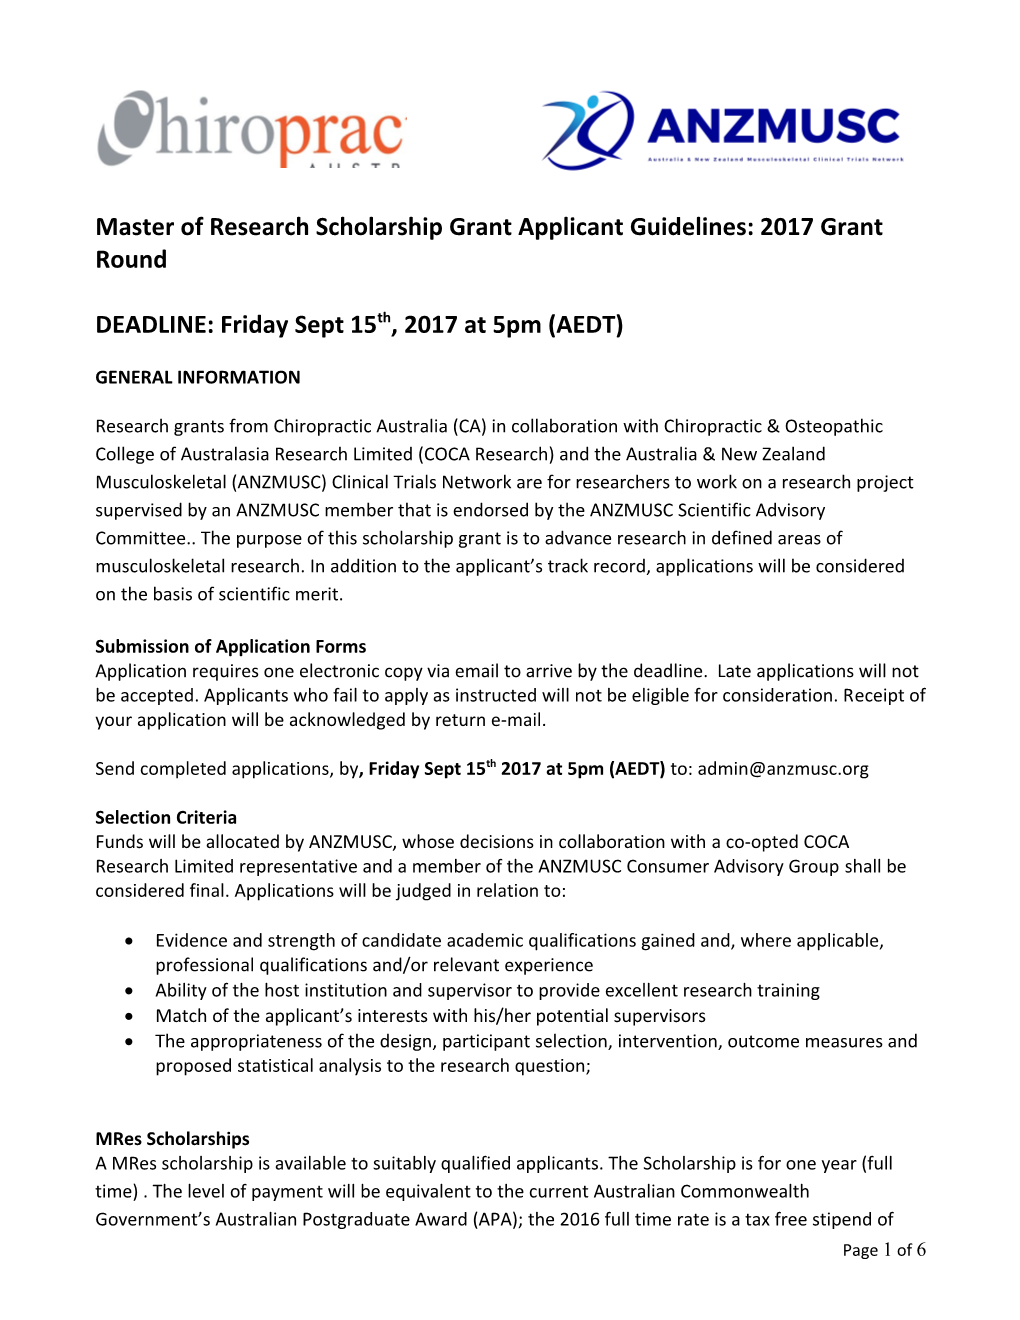 Master of Research Scholarship Grant Applicant Guidelines: 2017 Grant Round